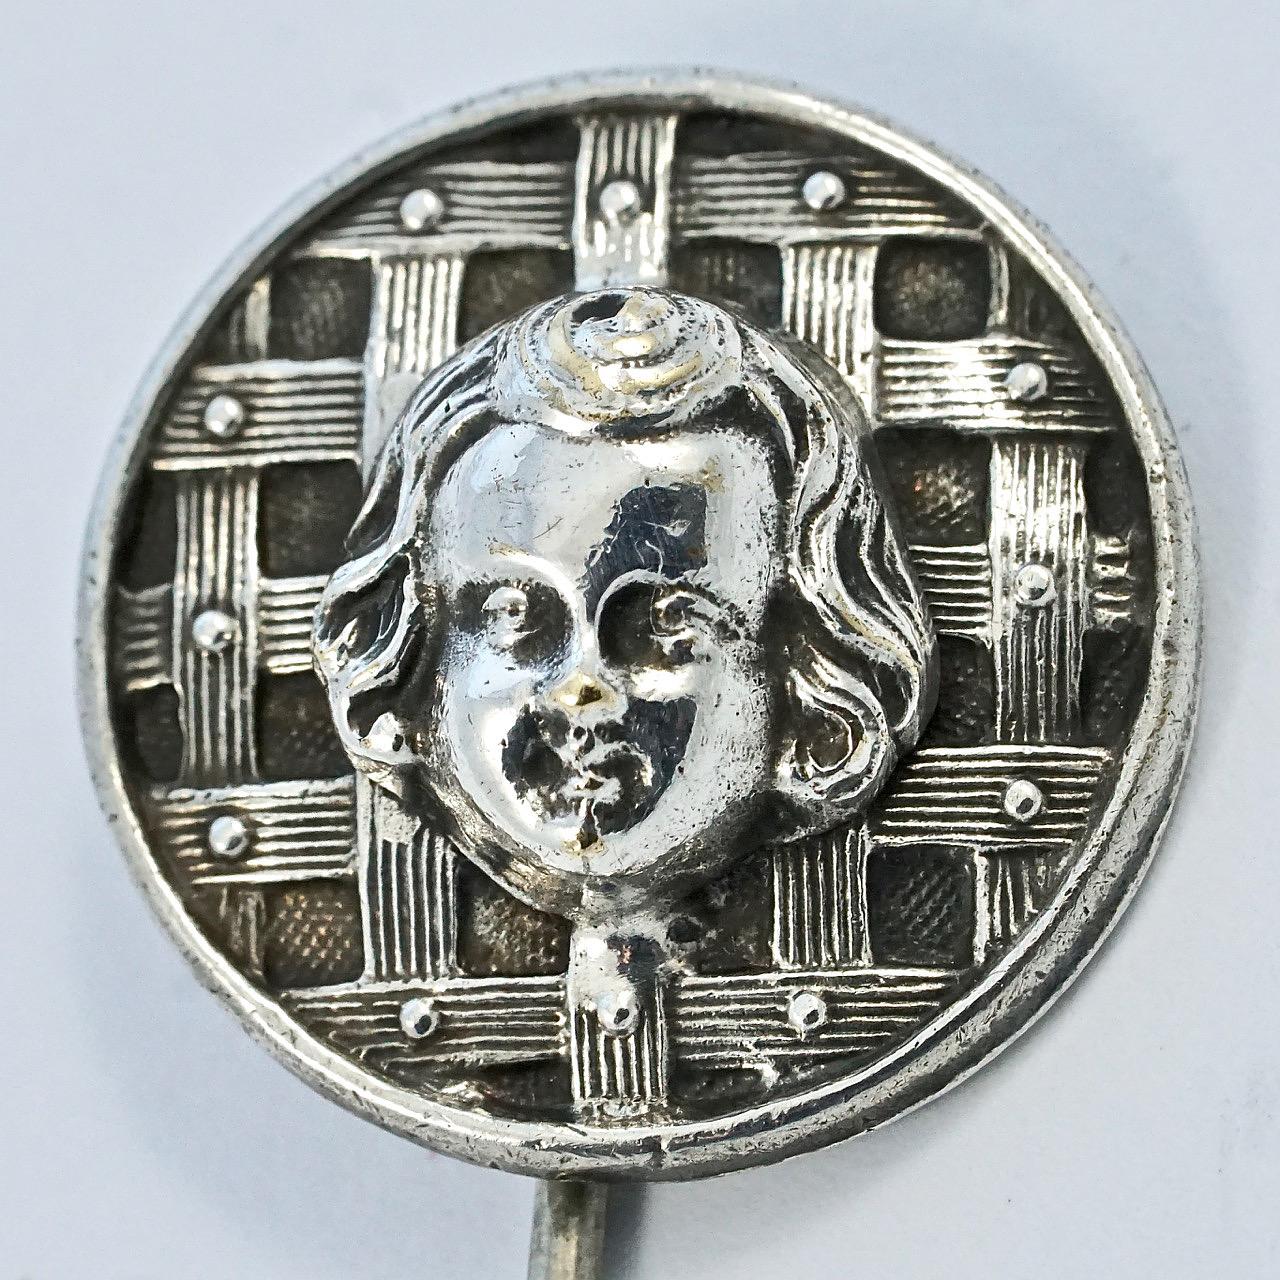 Wonderful antique Victorian silver plated stick pin, featuring a lovely cherubic face on a detailed woven and dot design. The stick pin does not test for silver. Measuring diameter 1.8cm / .7 inch. The ridges on the stick help it to hold on to